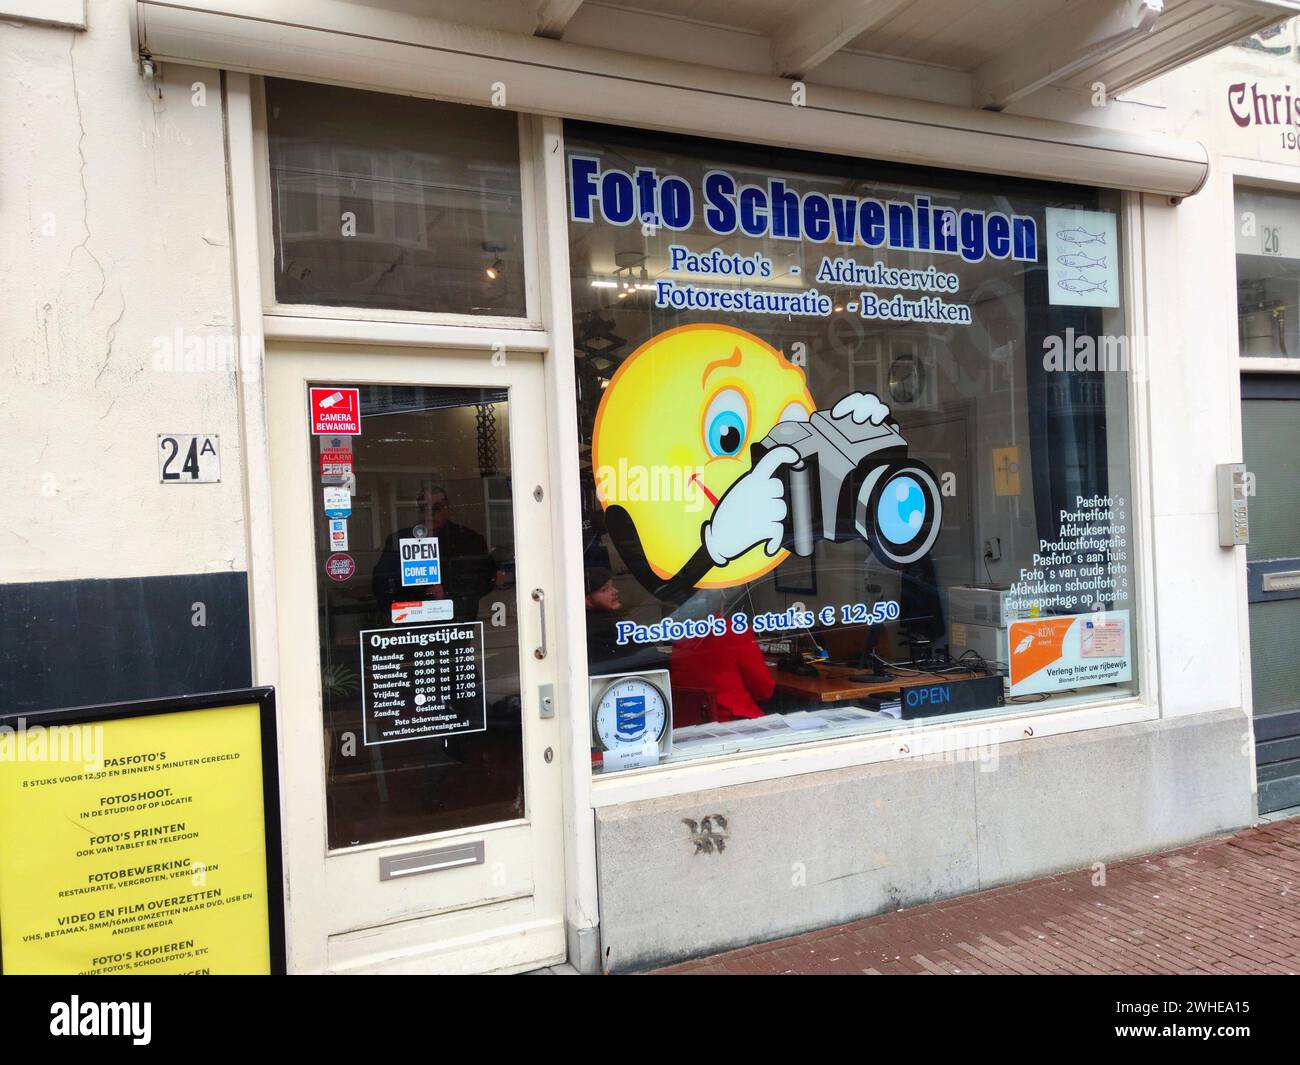 Photo shop with a photographing smiley on the window in the village of Scheveningen, the Netherlands Stock Photo